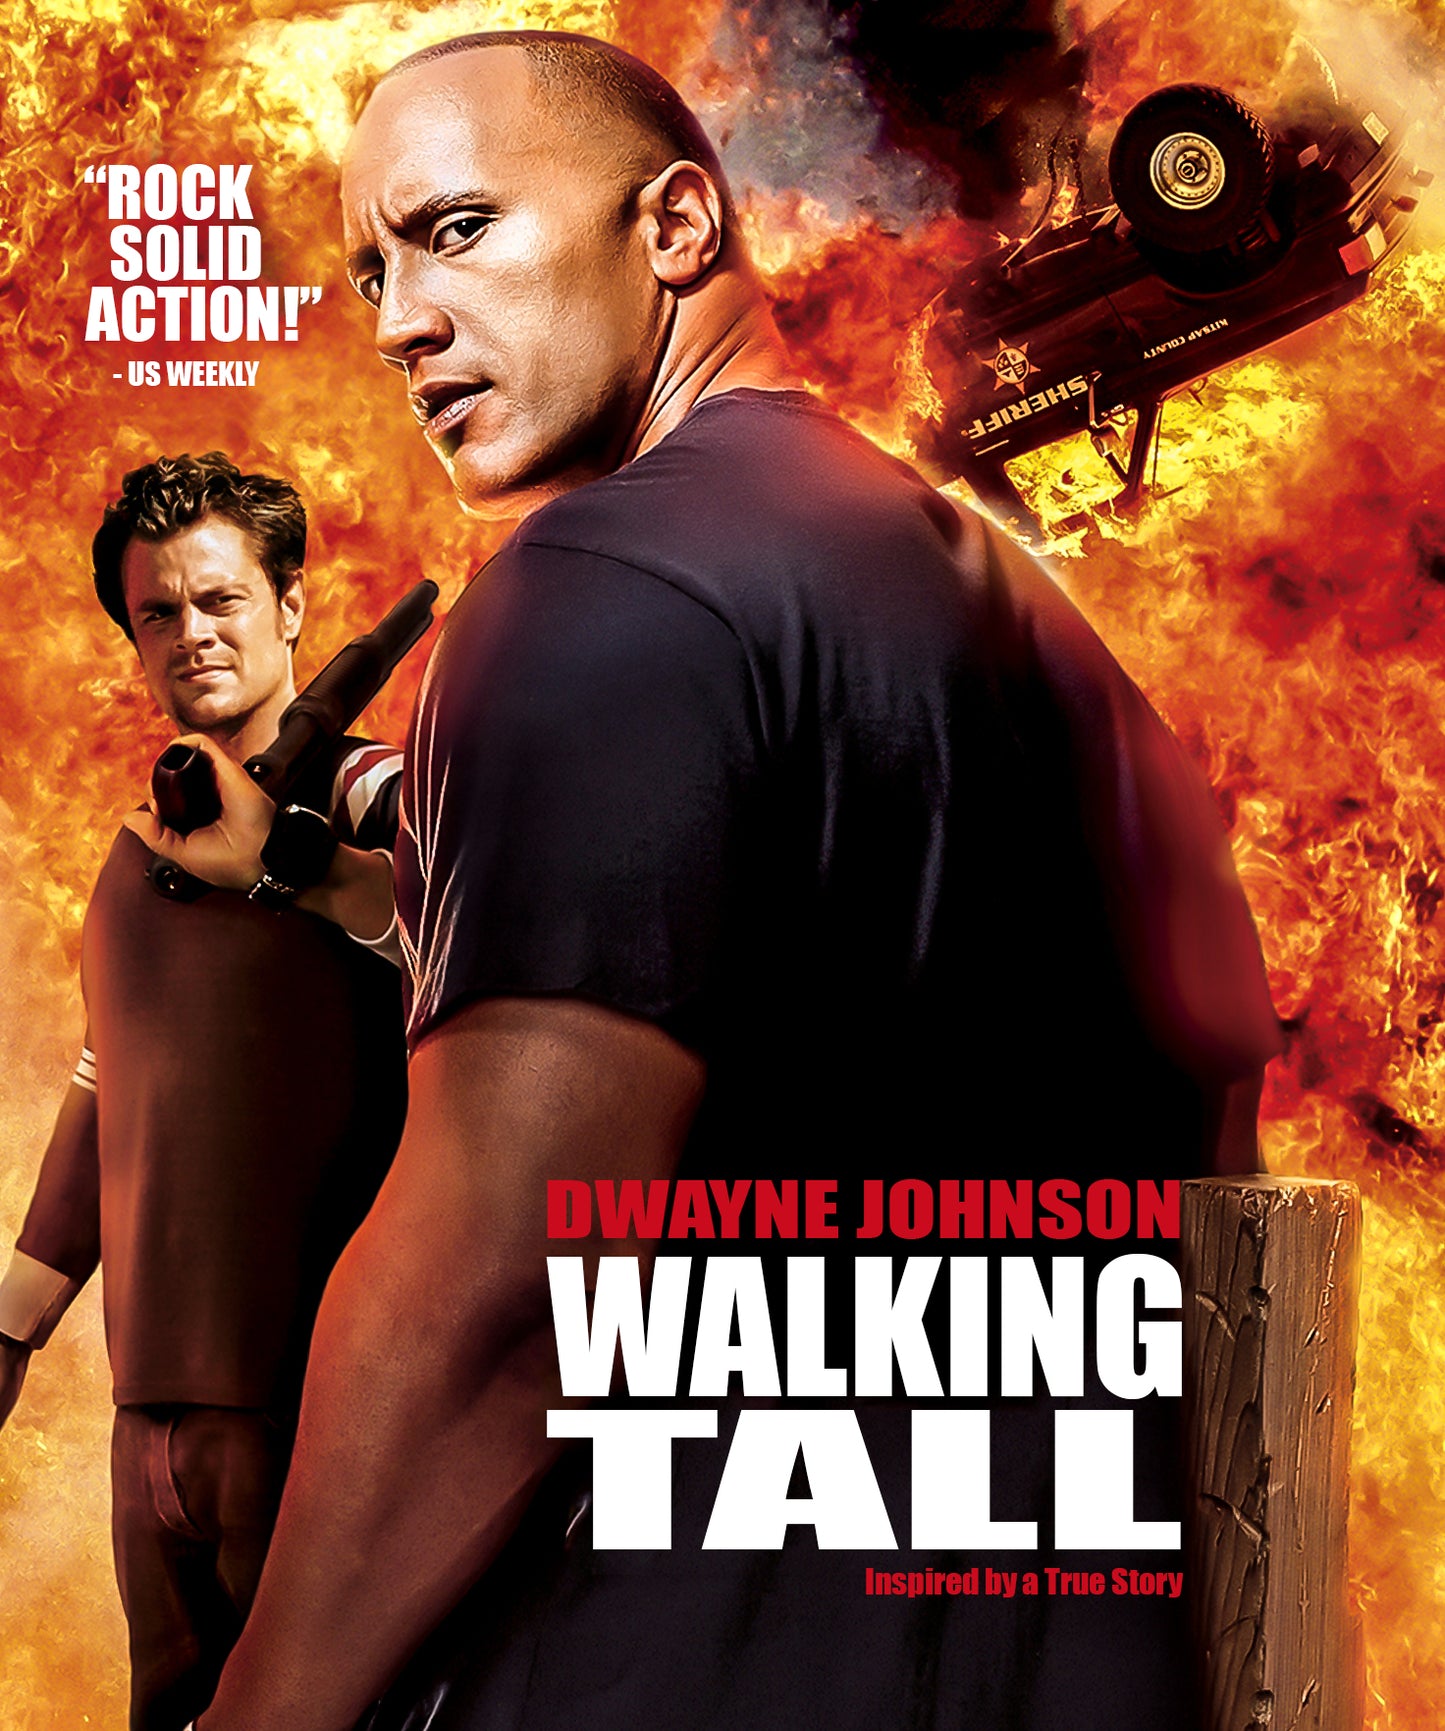 Walking Tall (2004) Blu-ray Special Edition with Slipcover (MVD)